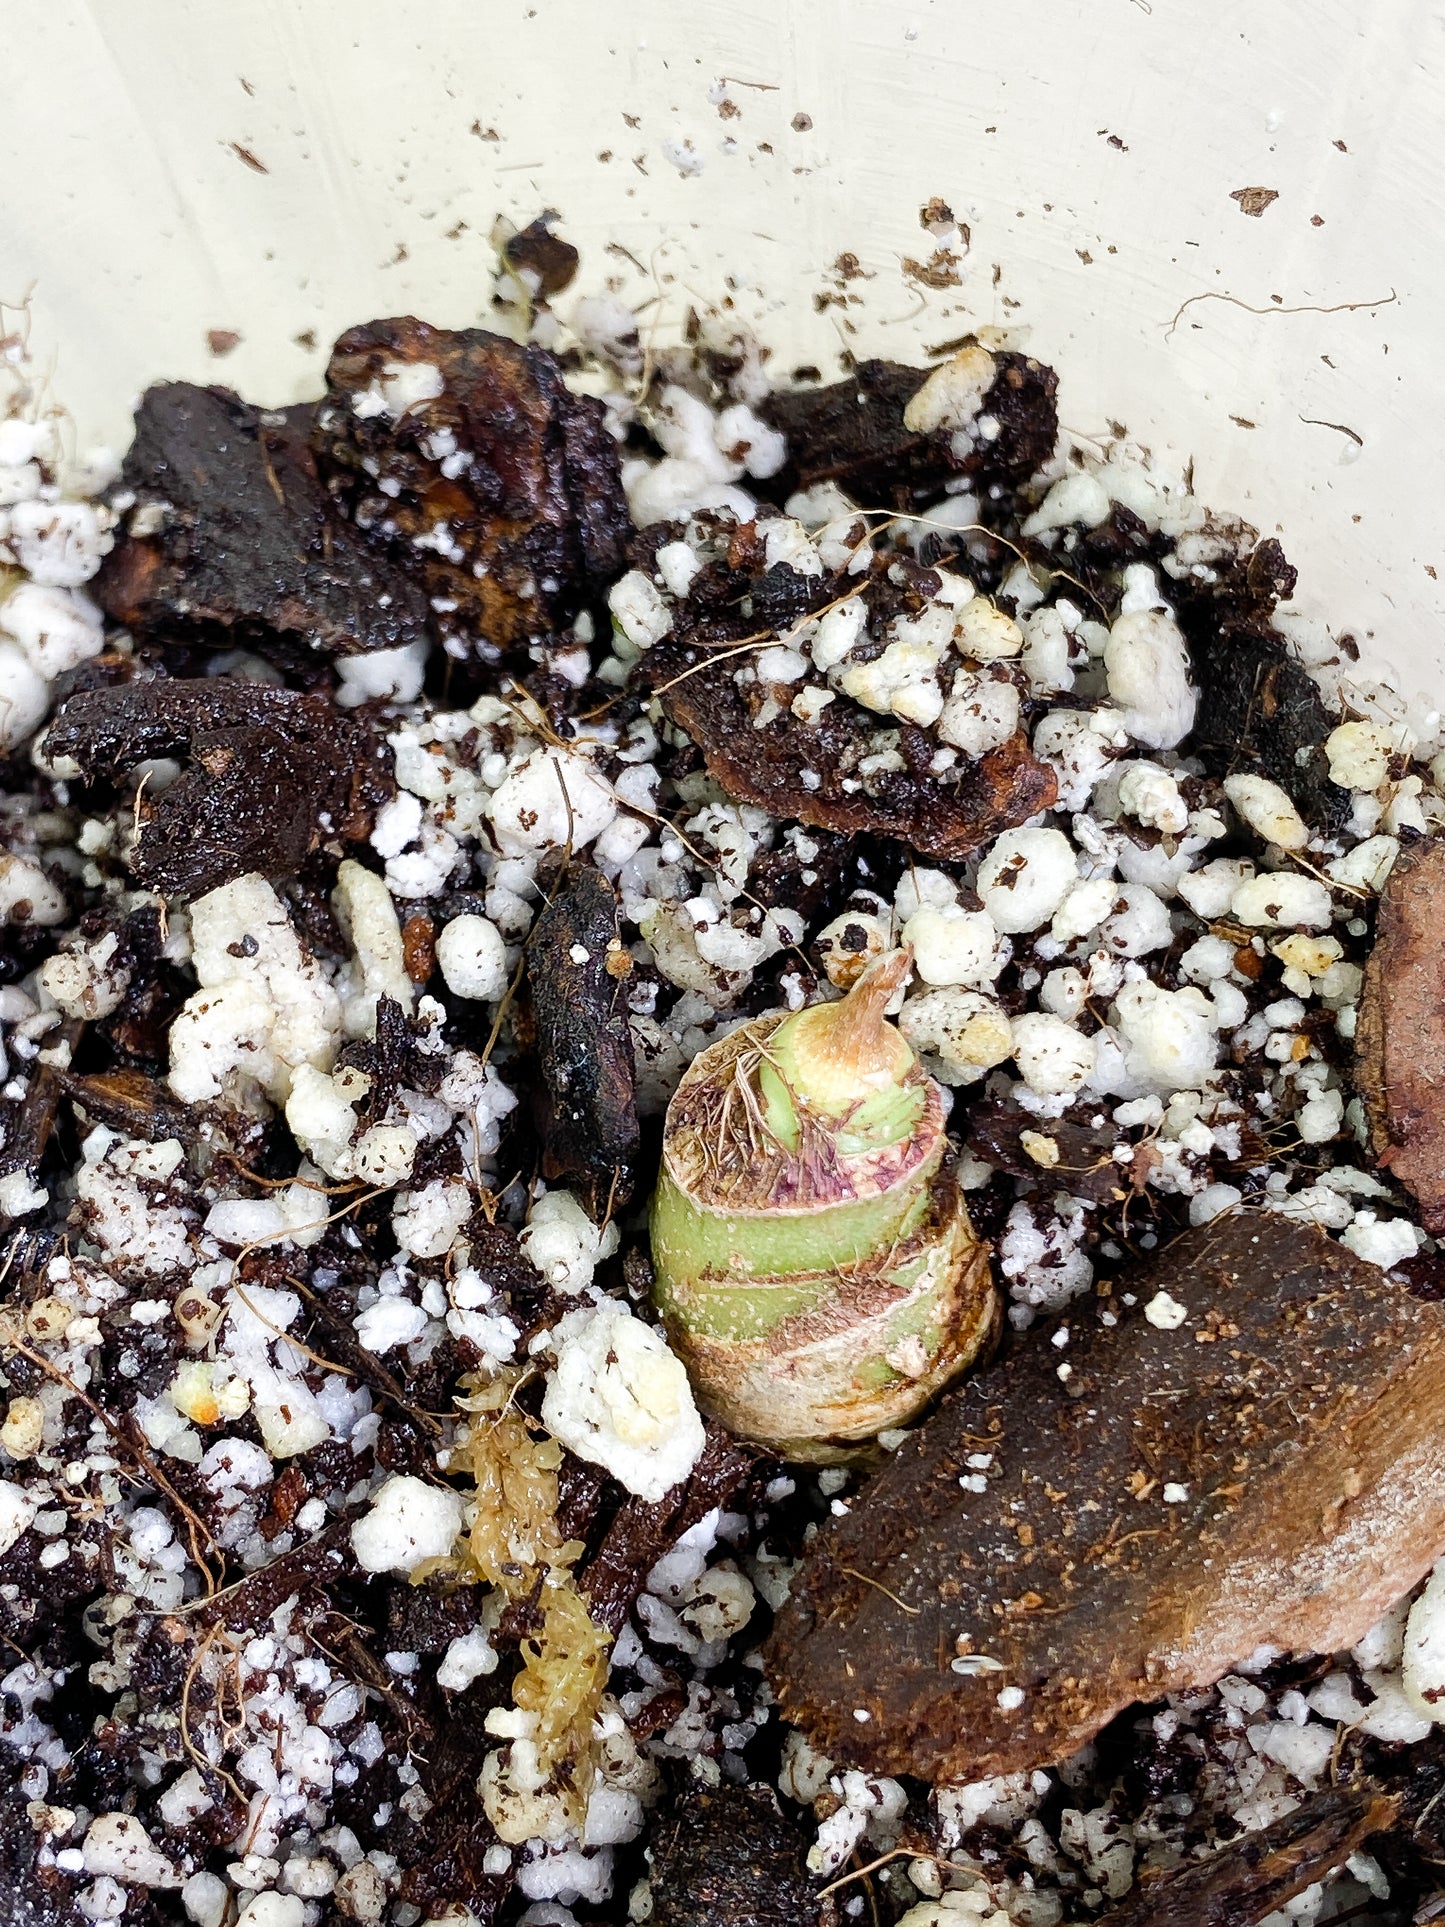 Alocasia Watsoniana sprout rooting